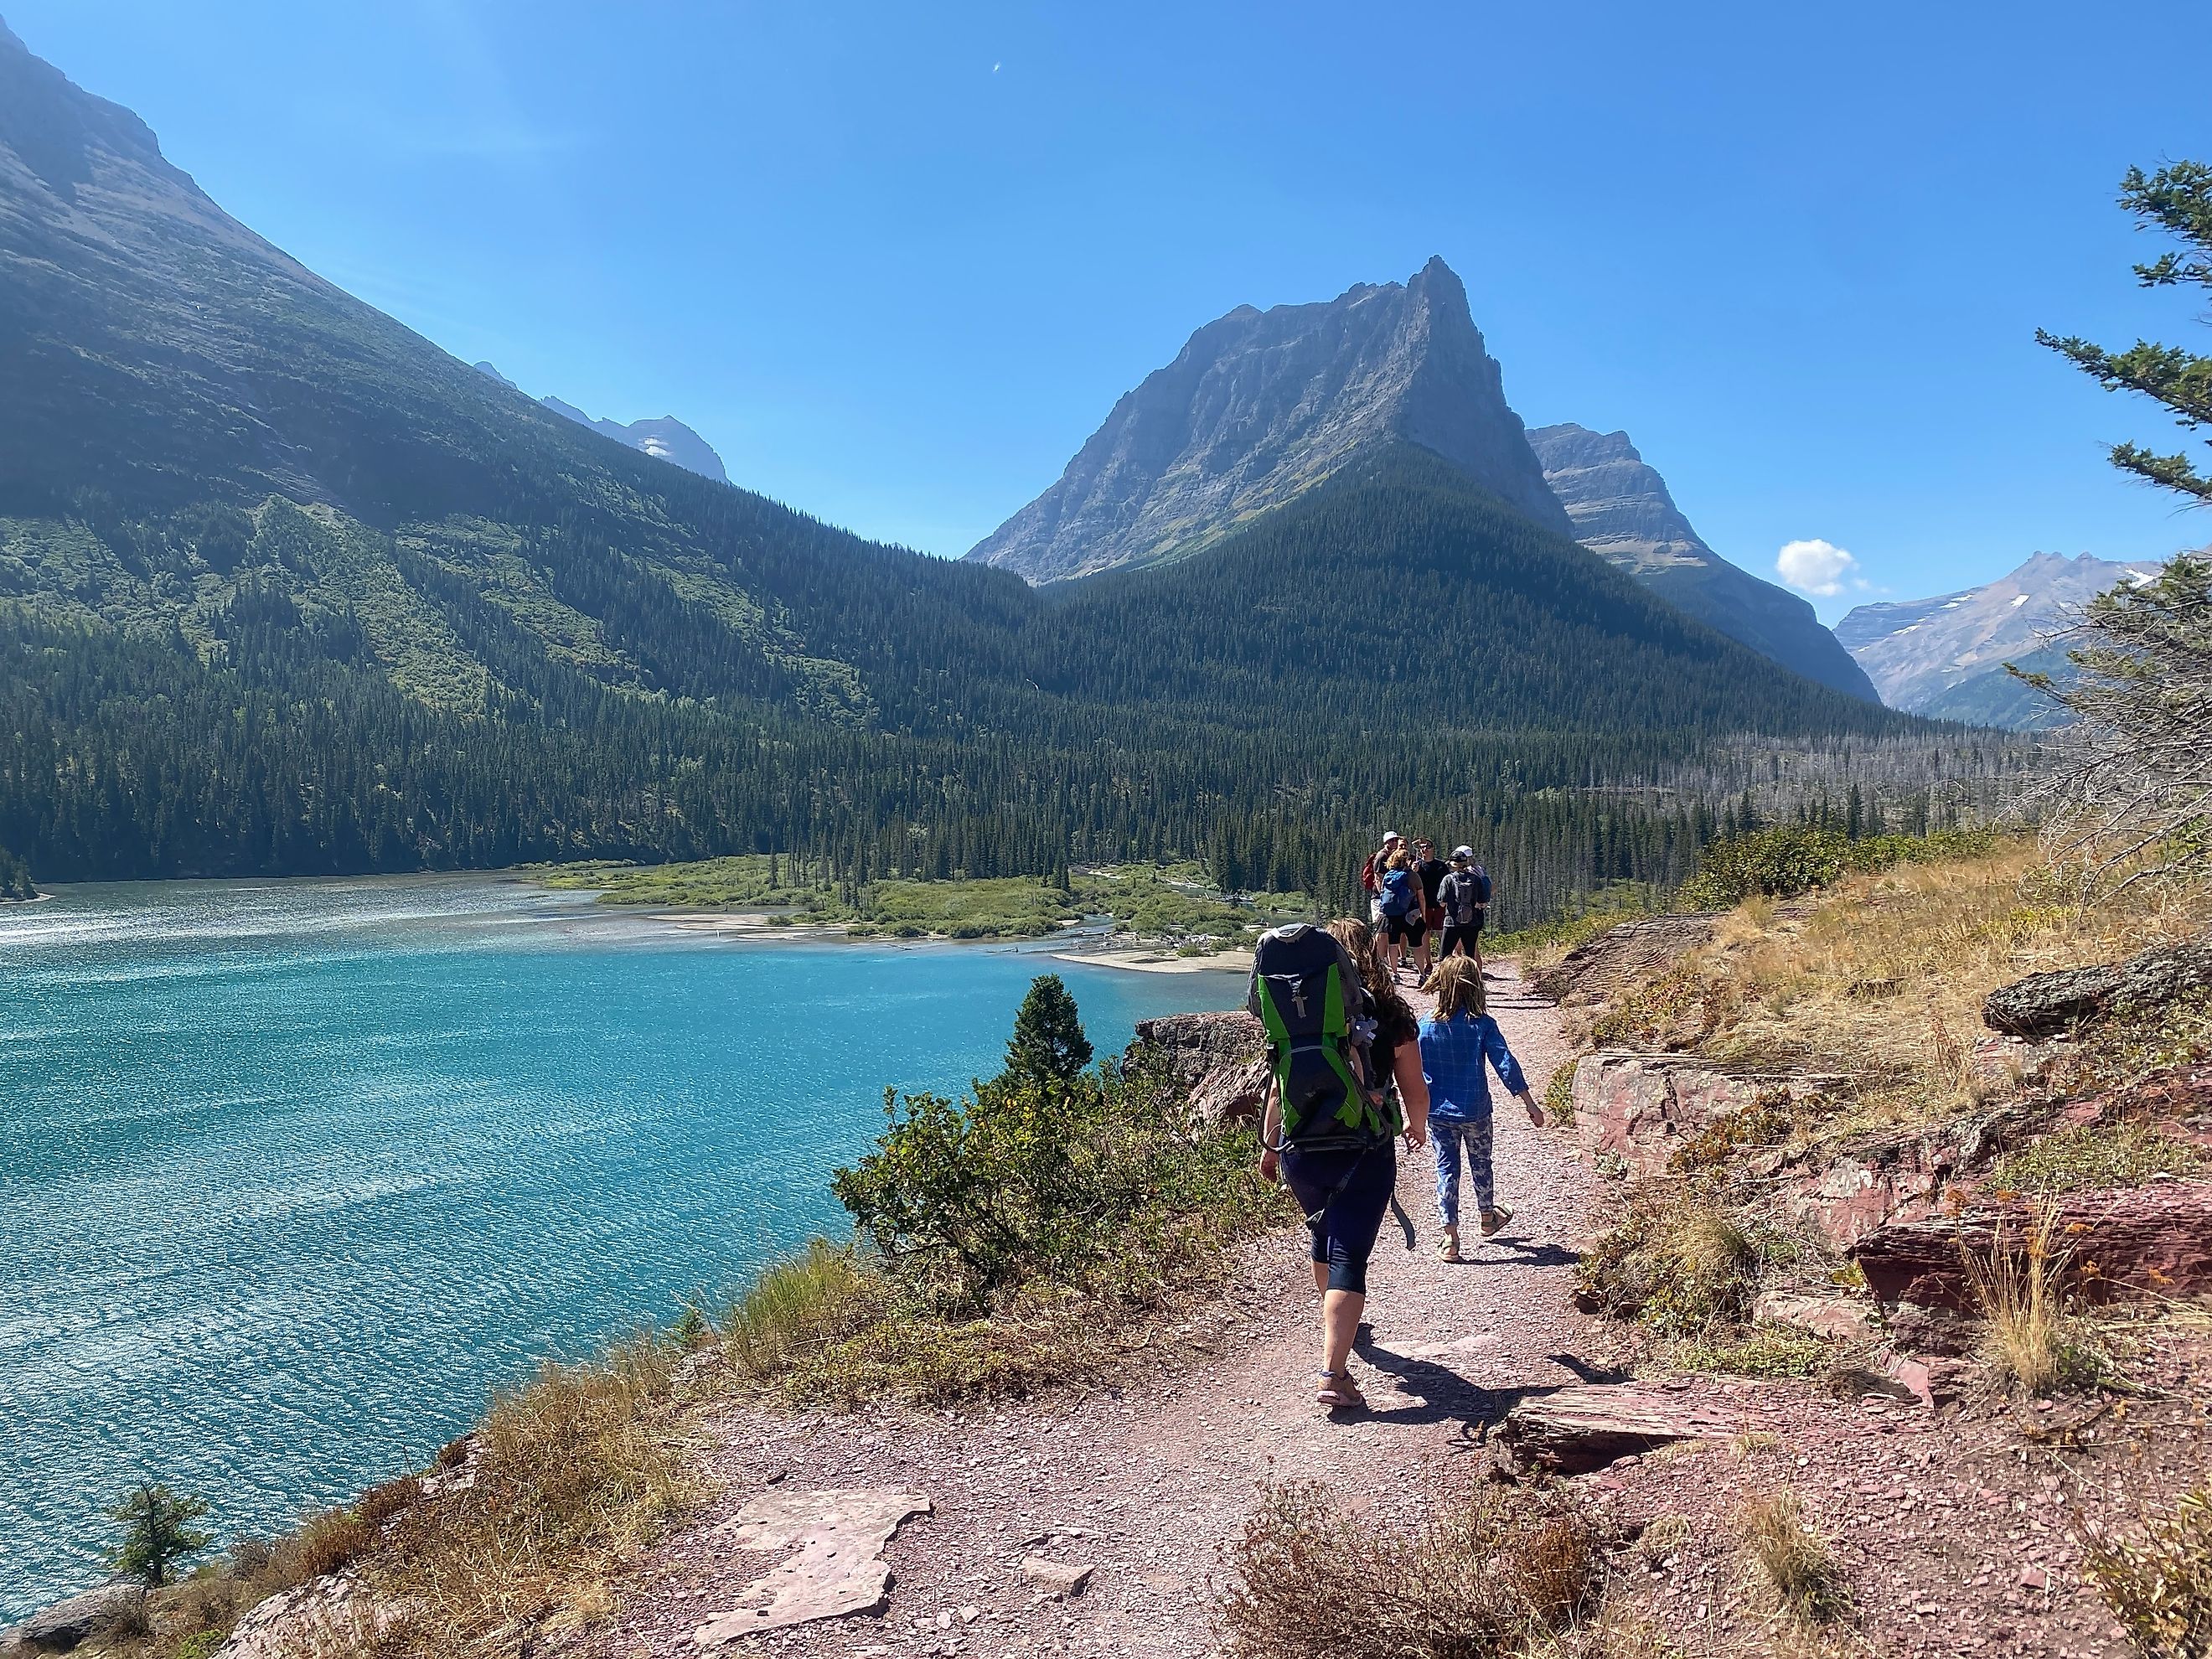 Hikers on the Three Falls Trail with Saint Mary Lake and mountains in the background, Glacier National Park, Montana. Editorial credit: christopher babcock / Shutterstock.com